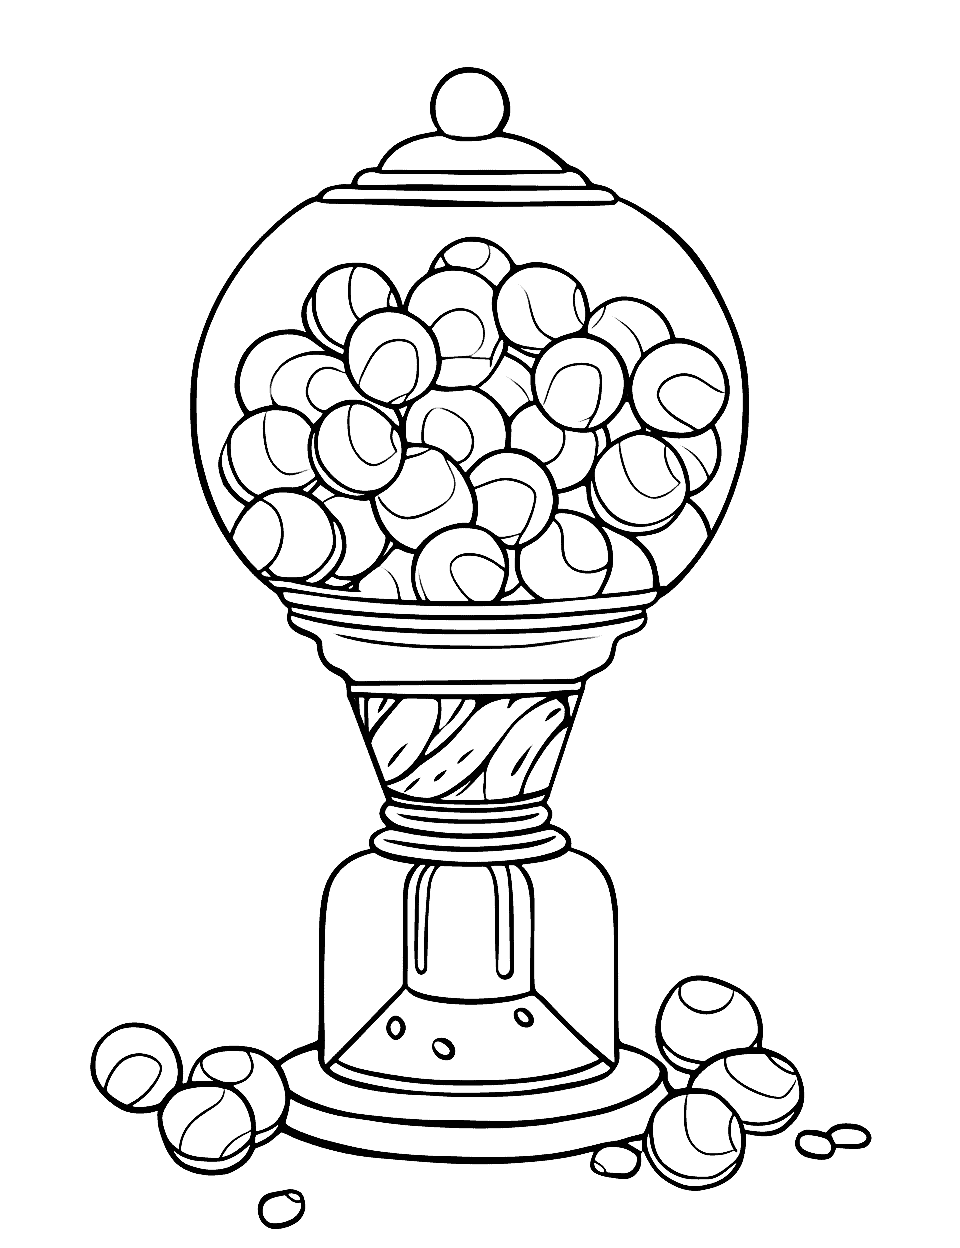 Gumball Machine Fun Candy Coloring Page - A large, colorful gumball machine with gumballs spilling out onto the floor.